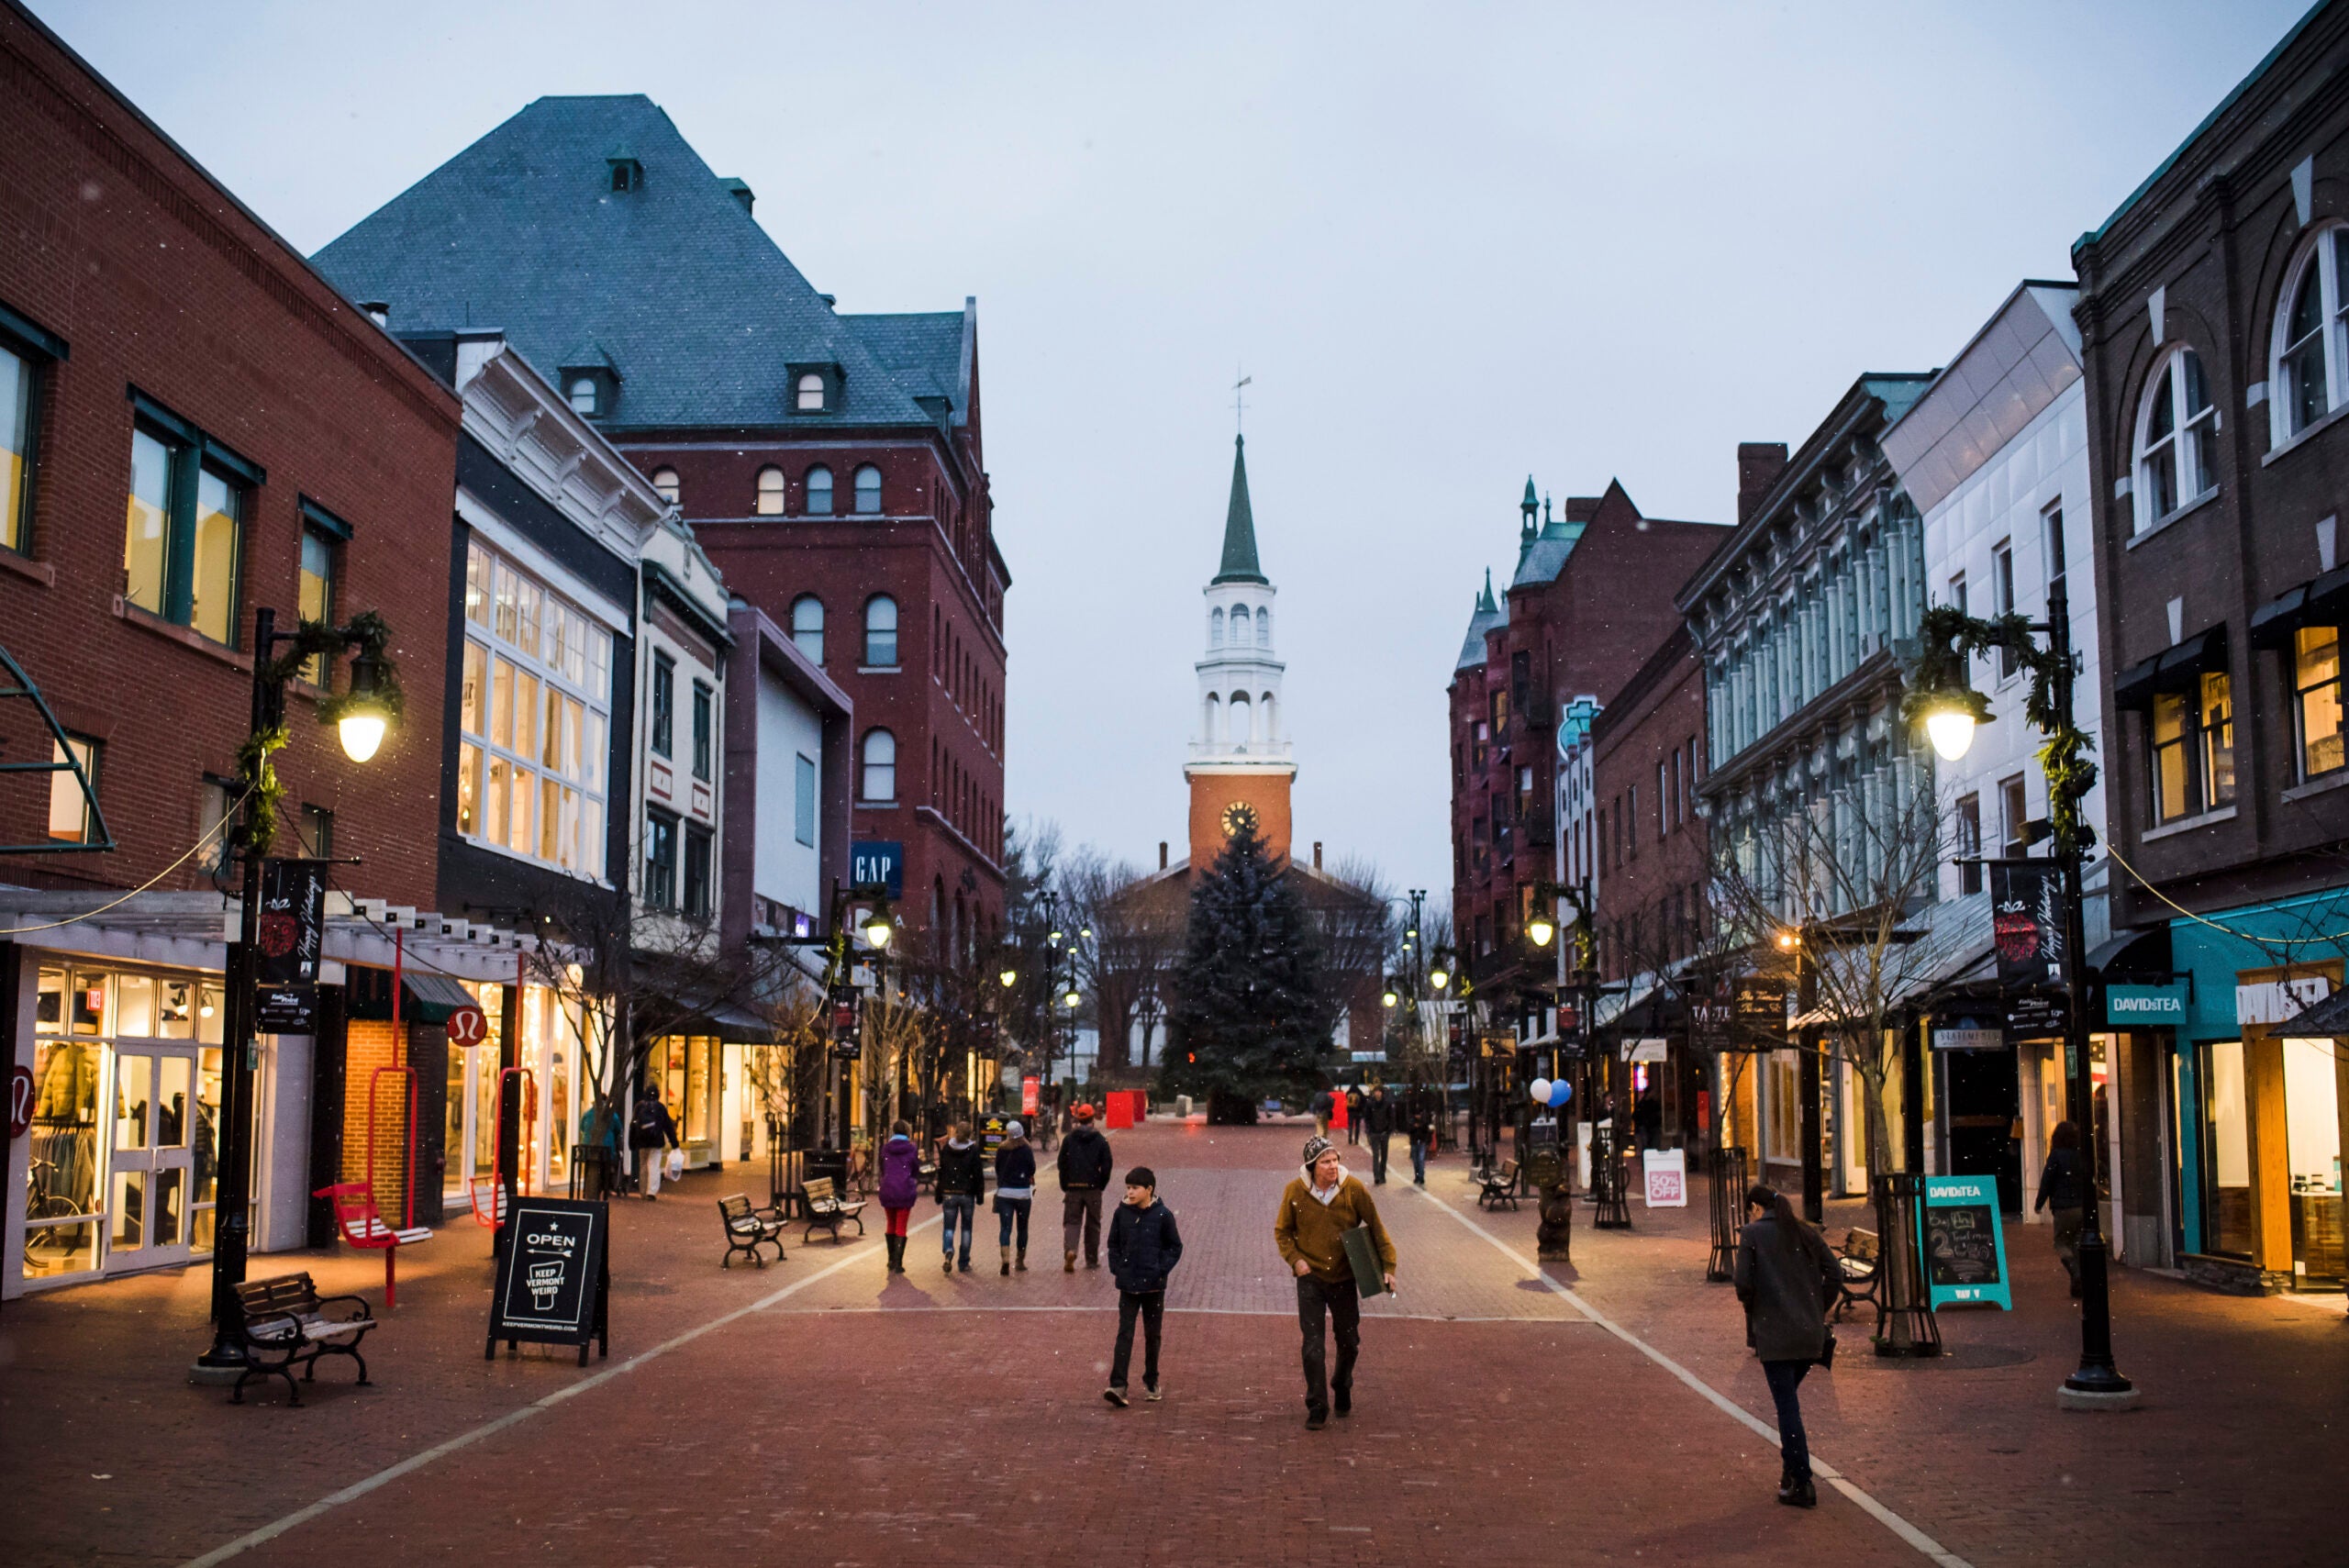 Fodor's says one Vermont city is a lot like Copenhagen